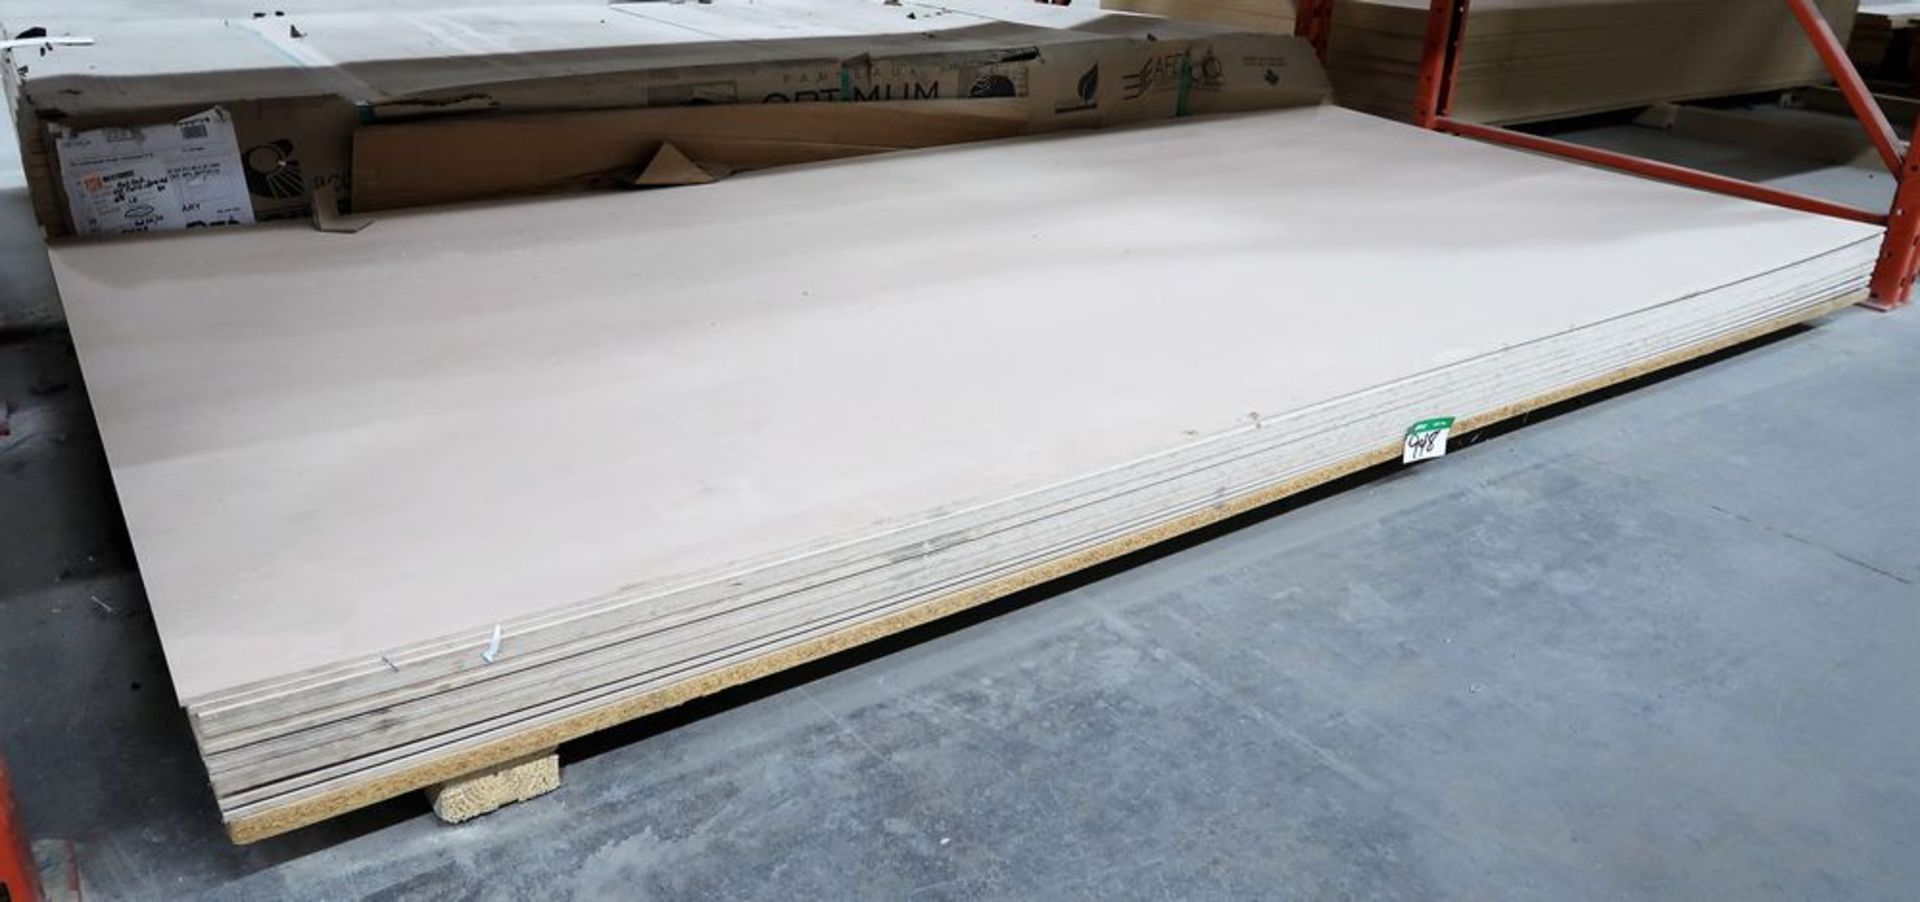 LOT OF 14 SHEETS NATURAL MAPLE/DRAGONPLY 4' X 8' X 1/4" G2S